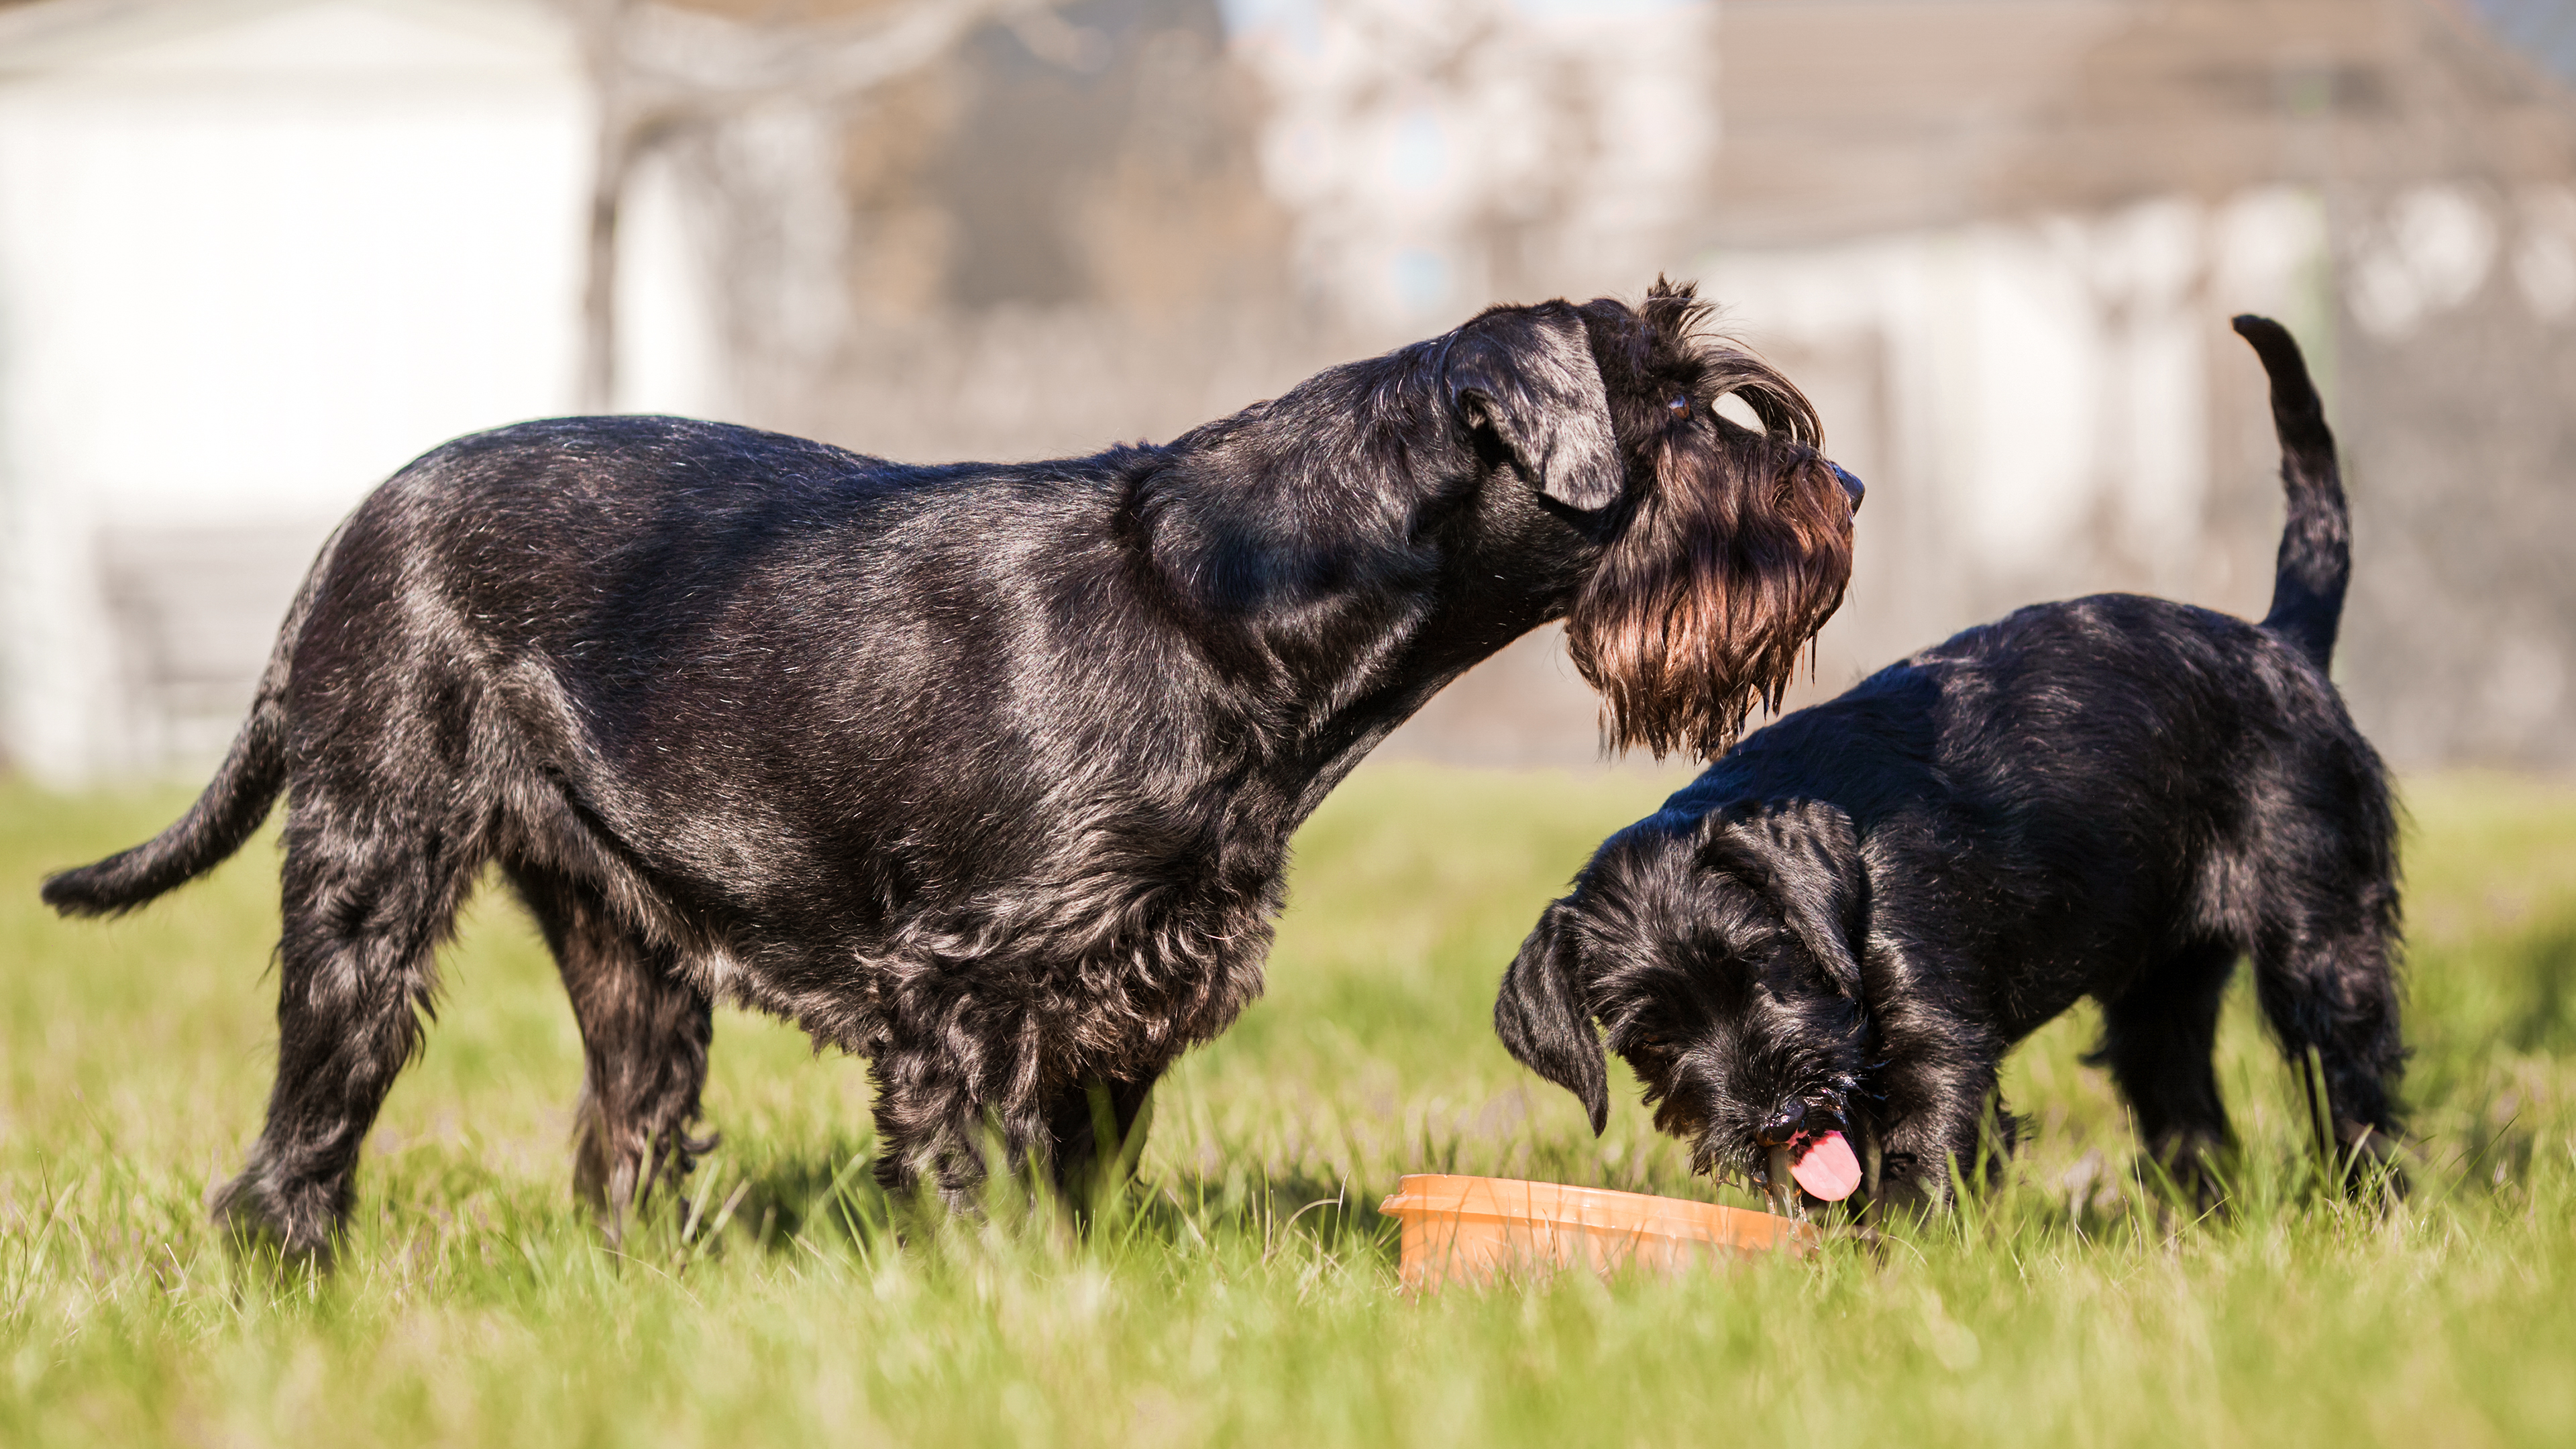 Standard Schnauzer adult and puppy standing outdoors in a garden